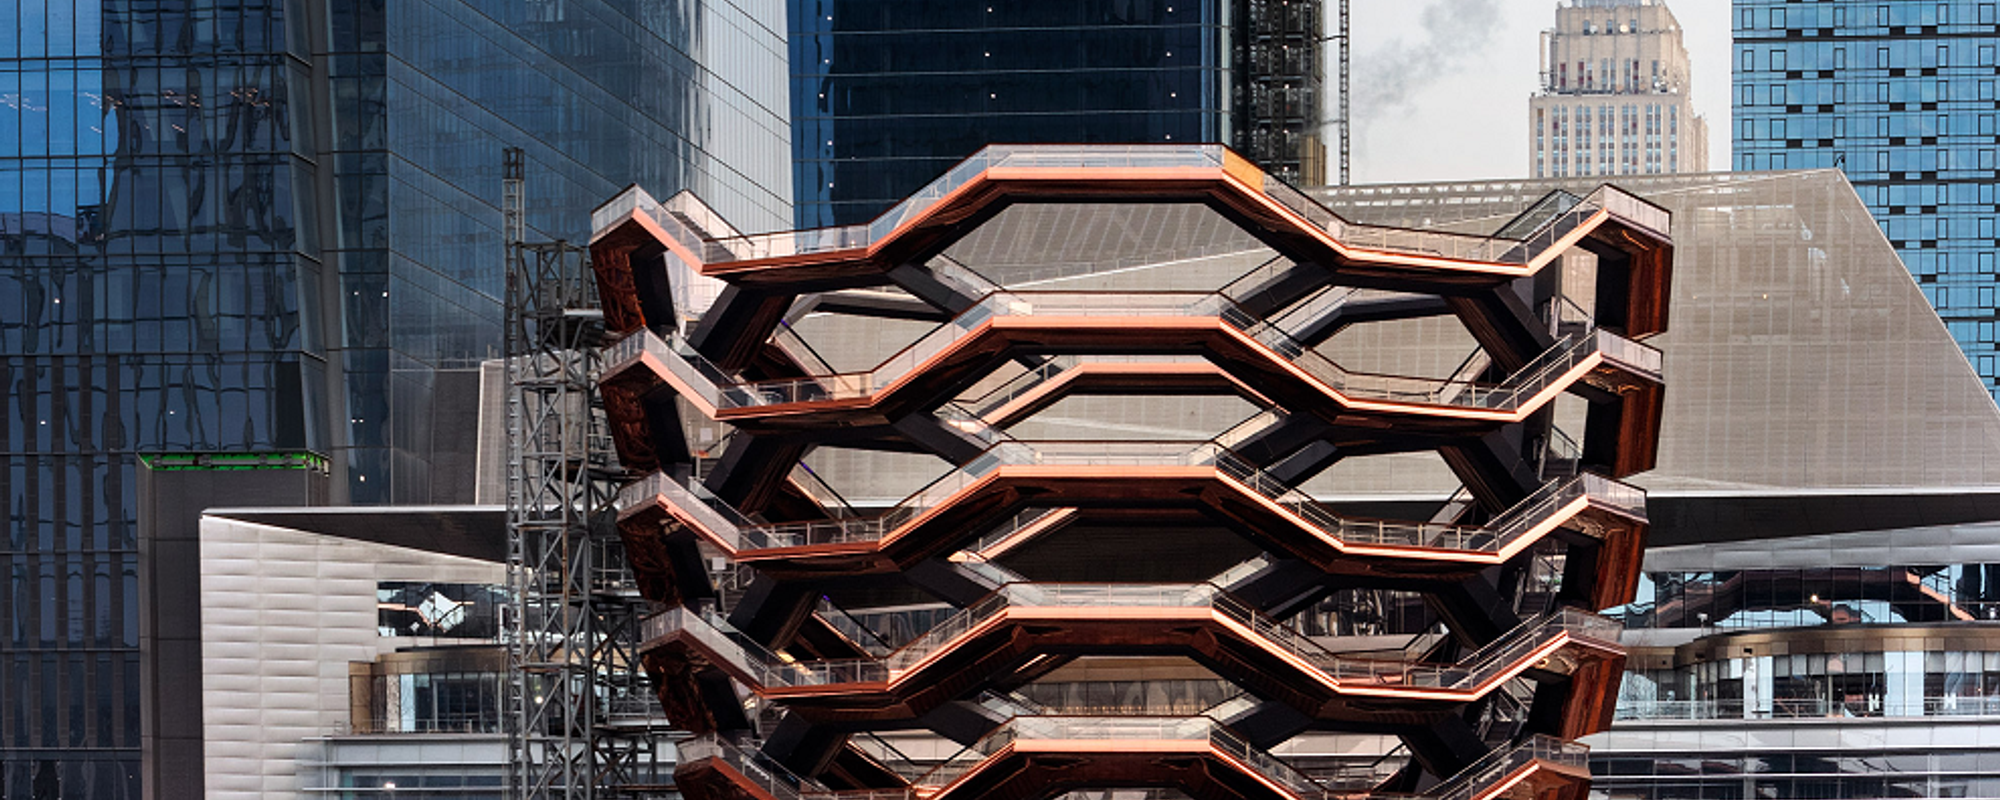 A Magnificent New NYC Centerpiece: Hudson Yards' The Vessel by Thomas Heatherwick